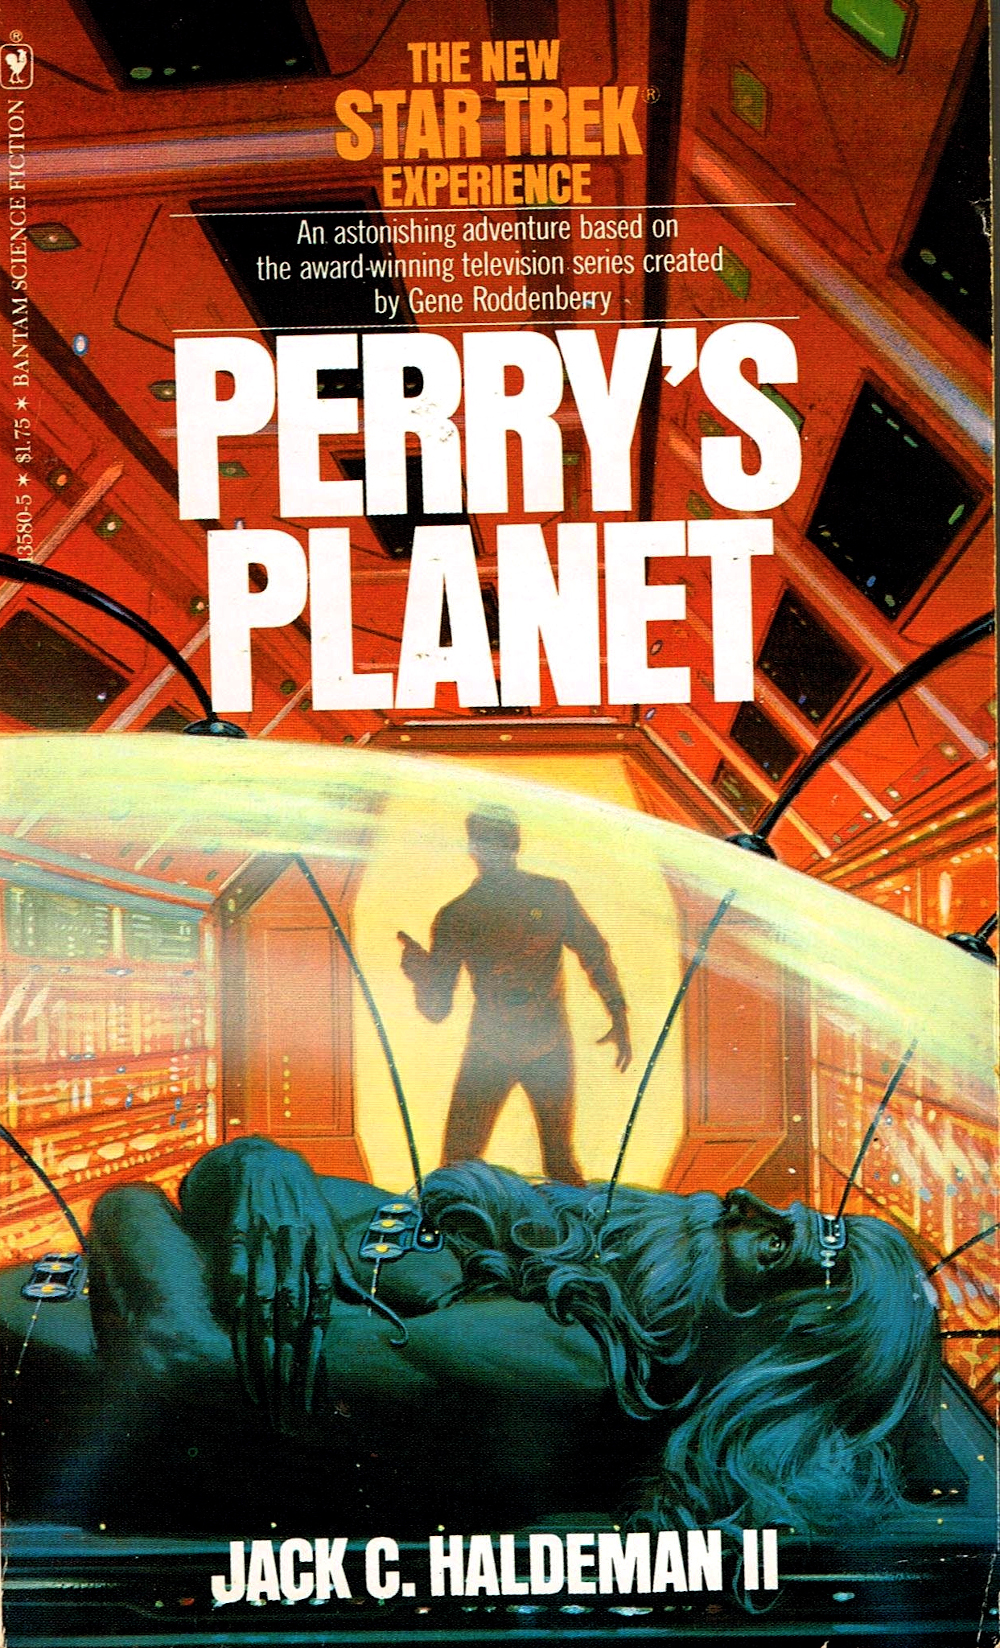 "Perry's Planet"